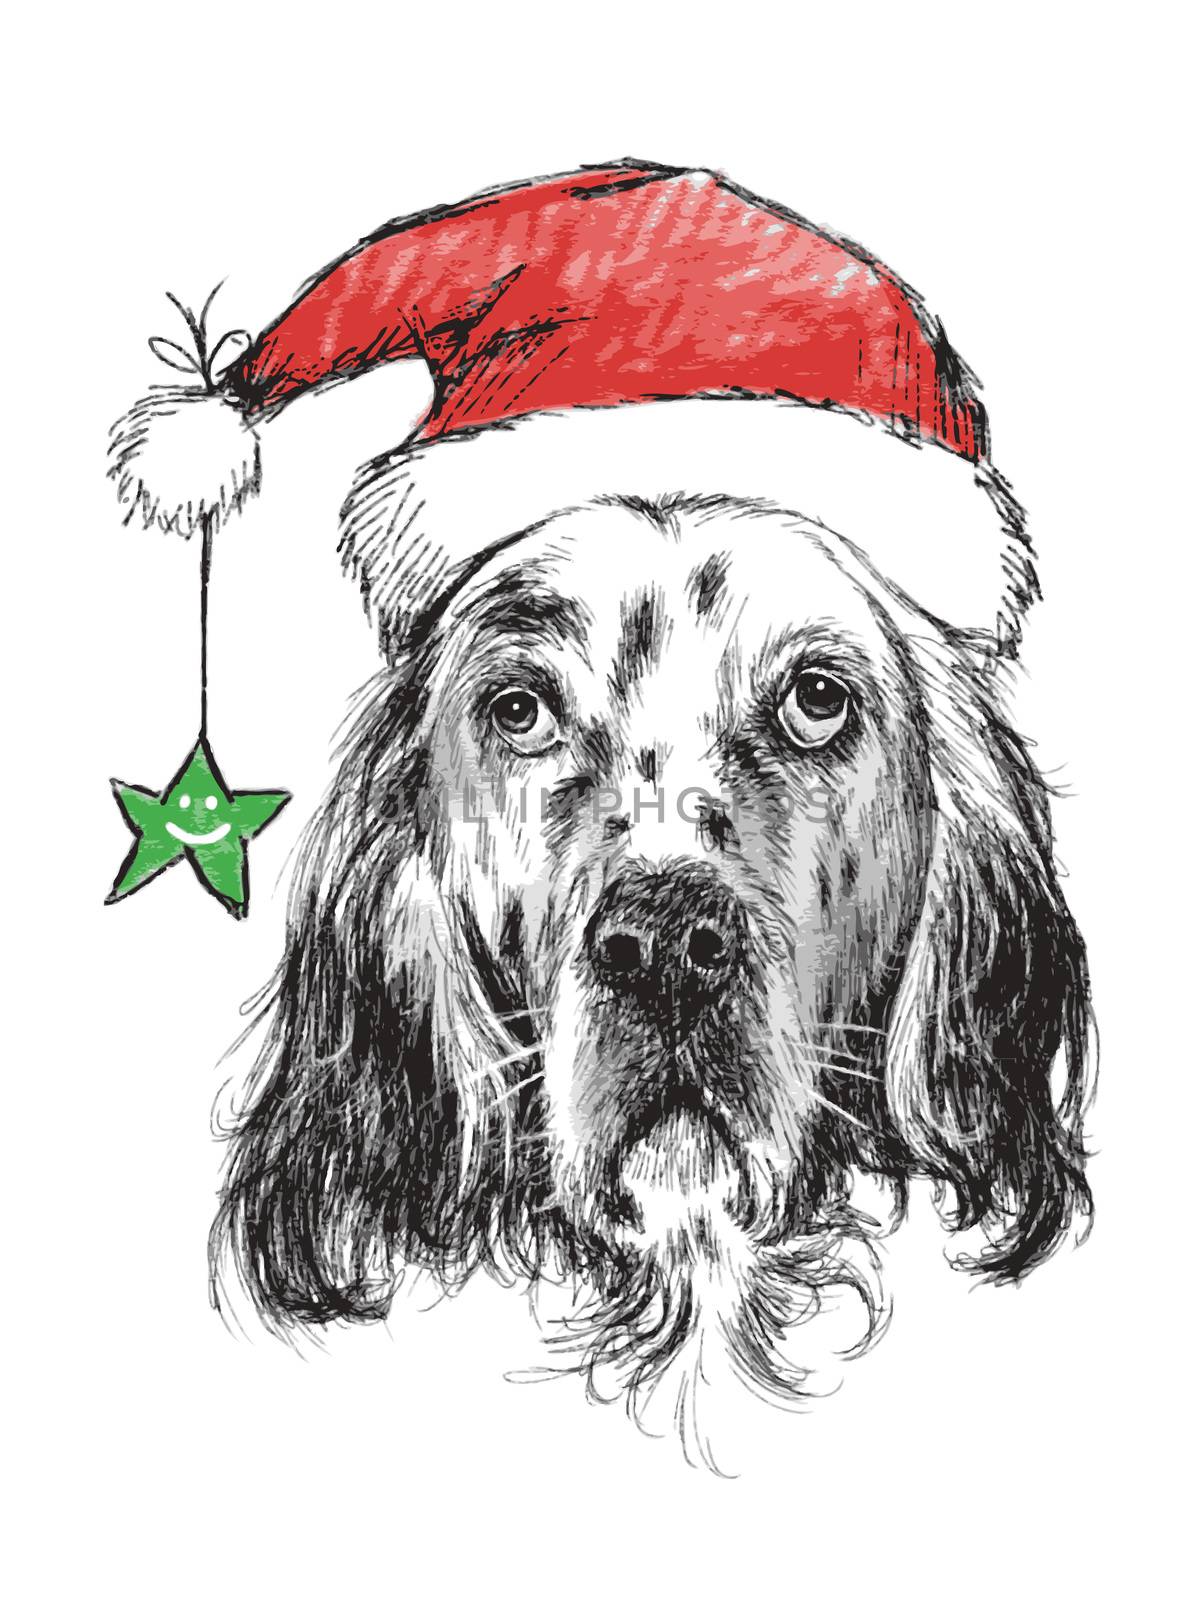 English setter with santa claus hat by simpleBE